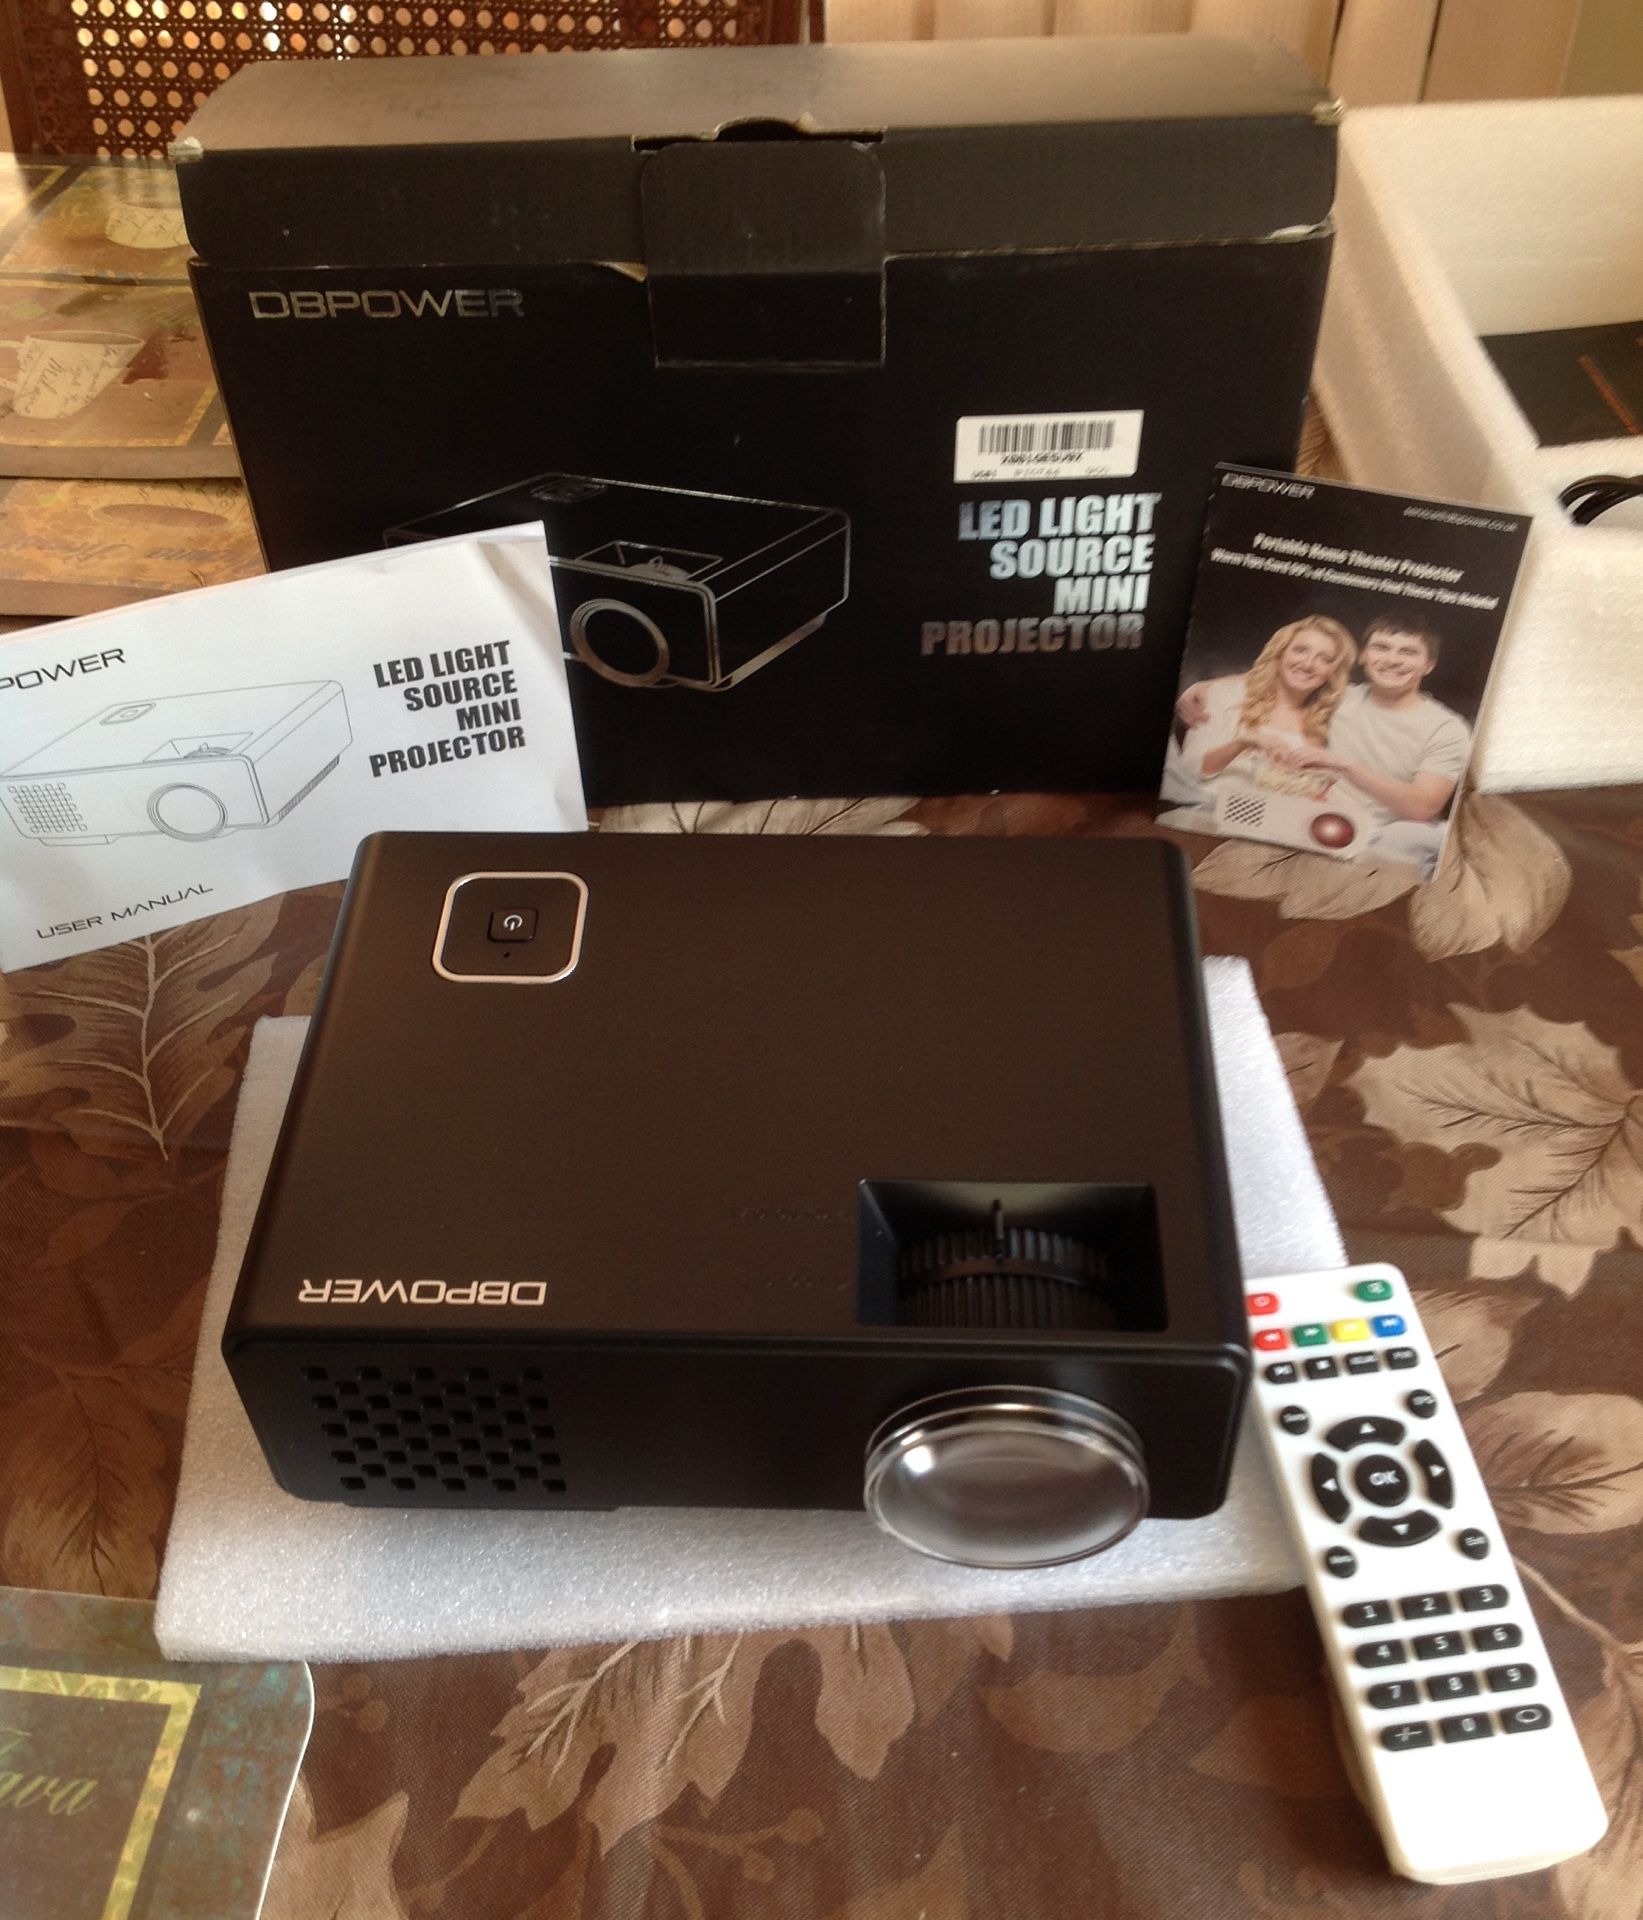 Dbpower home projector, trade for Apple Watch, yes it's still available, still available, still available